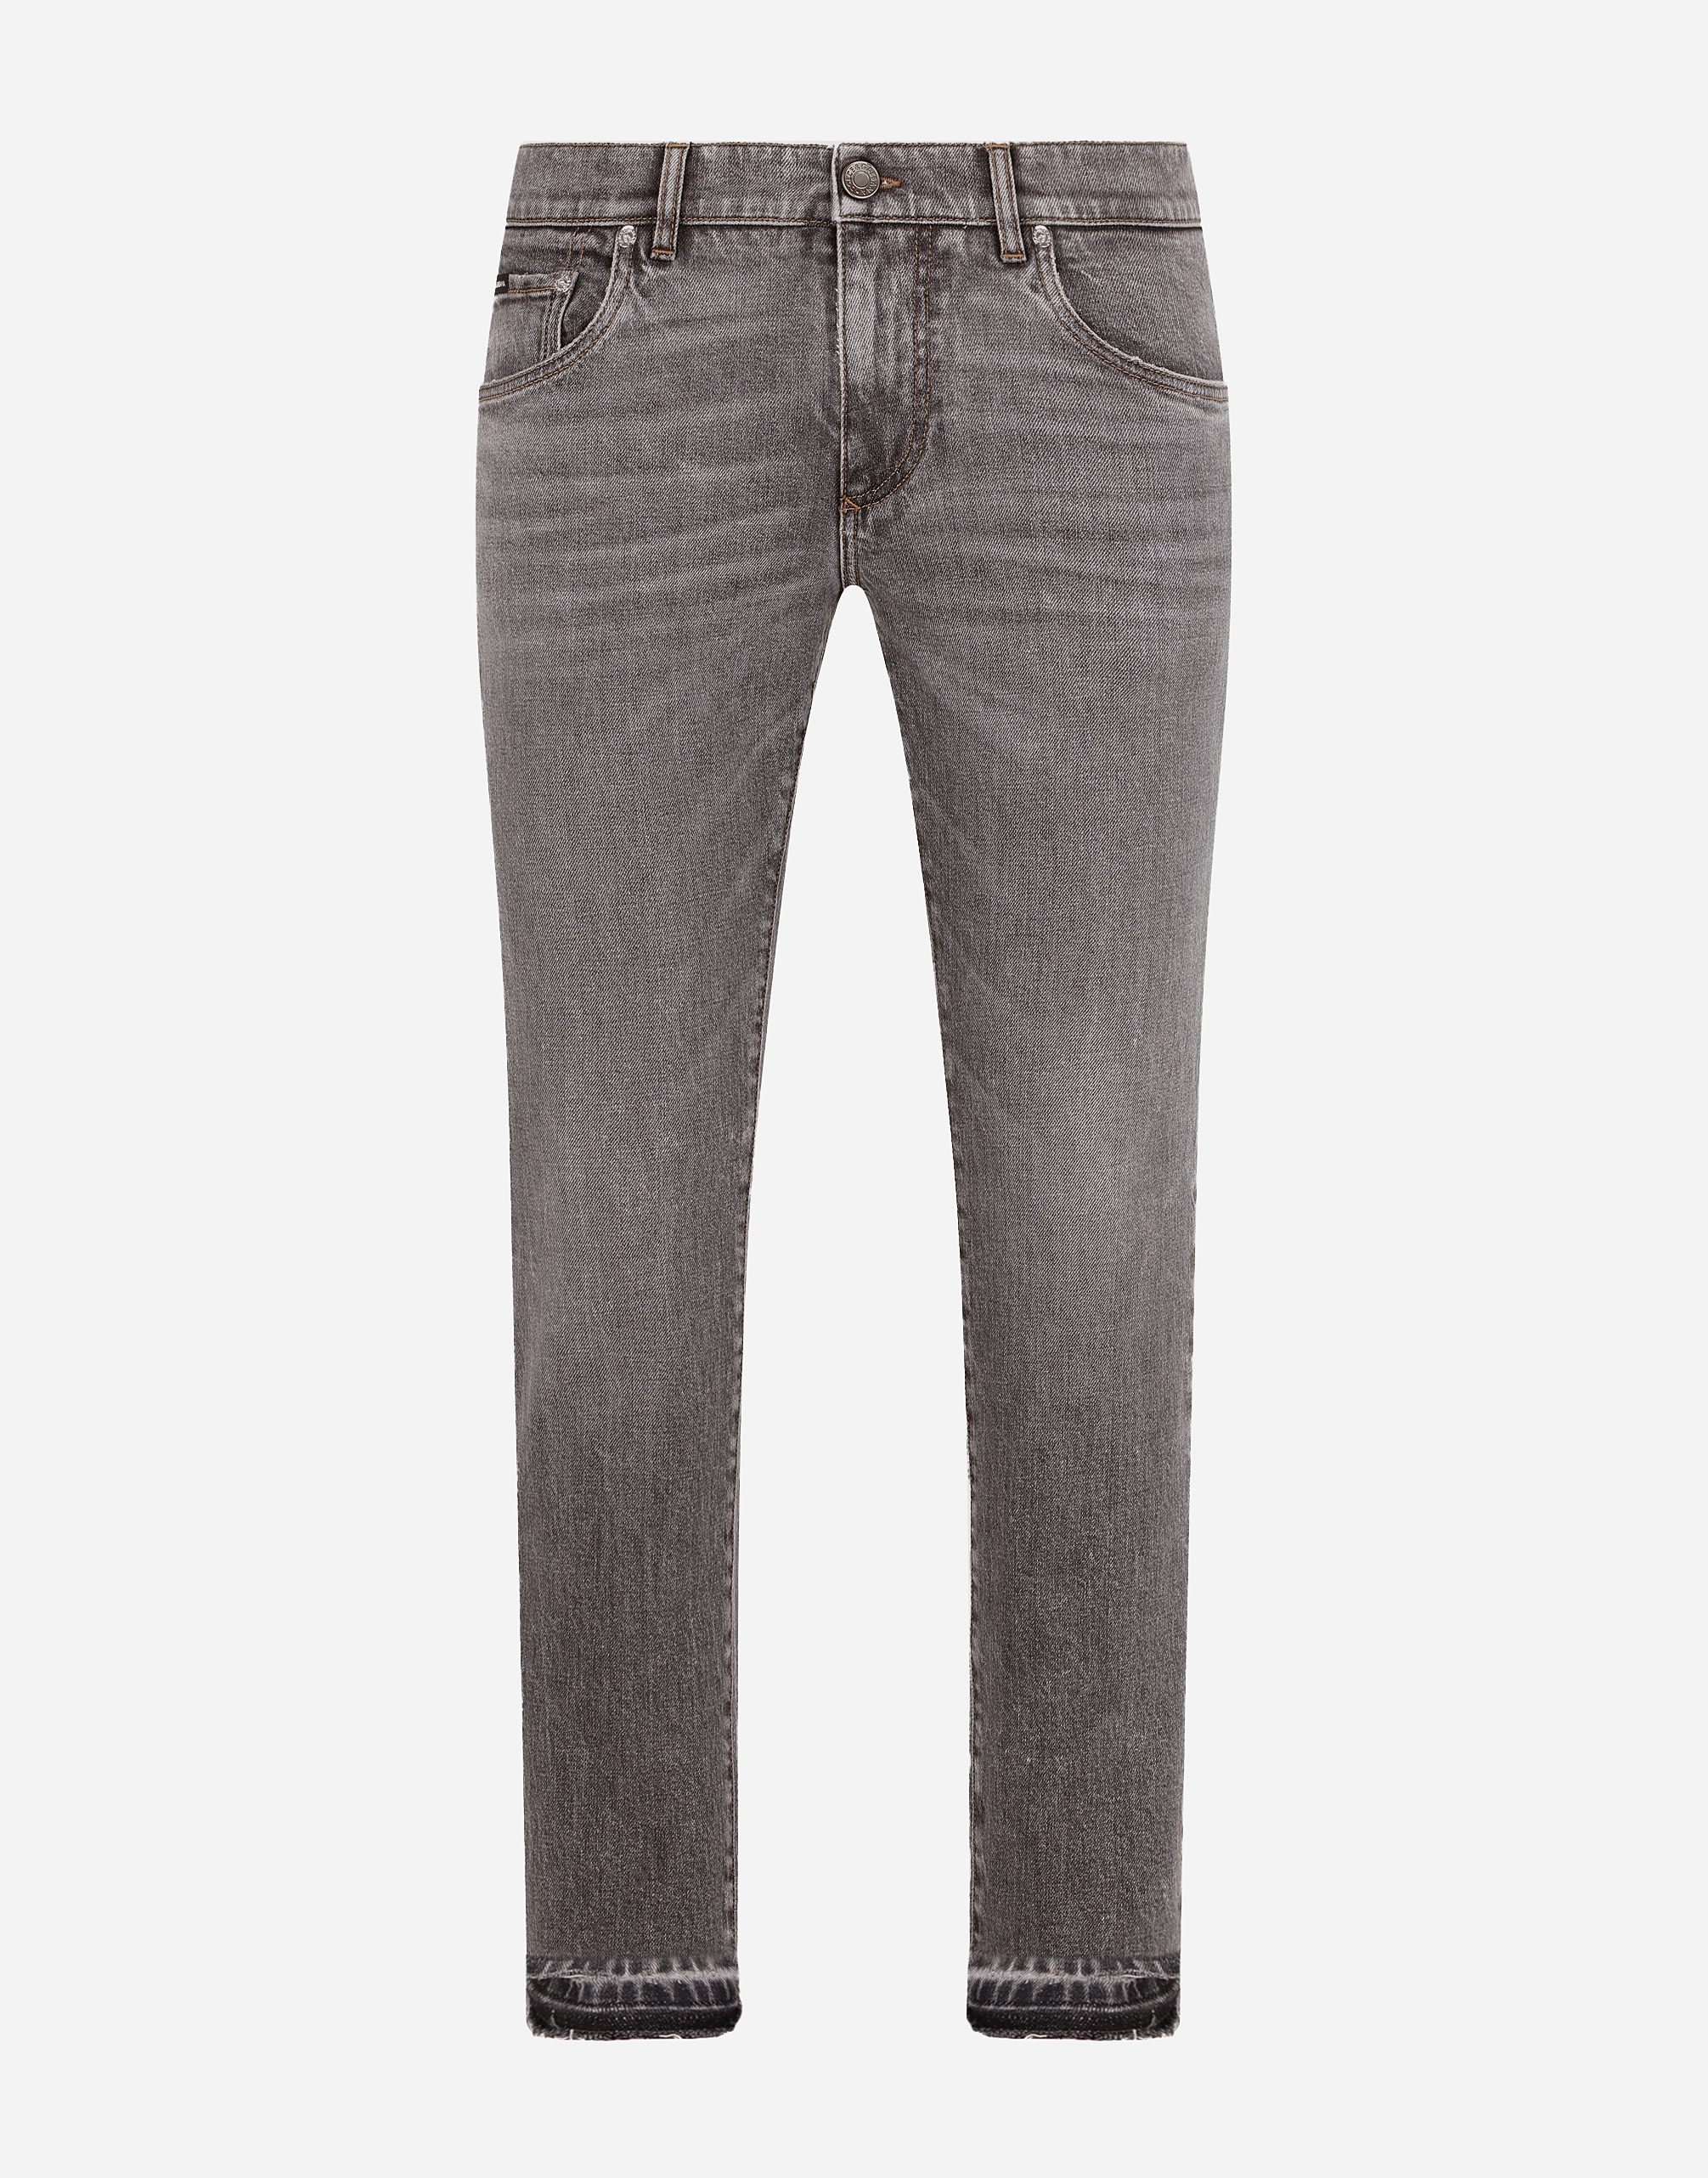 Light blue skinny stretch jeans with frayed turn-ups in Grey